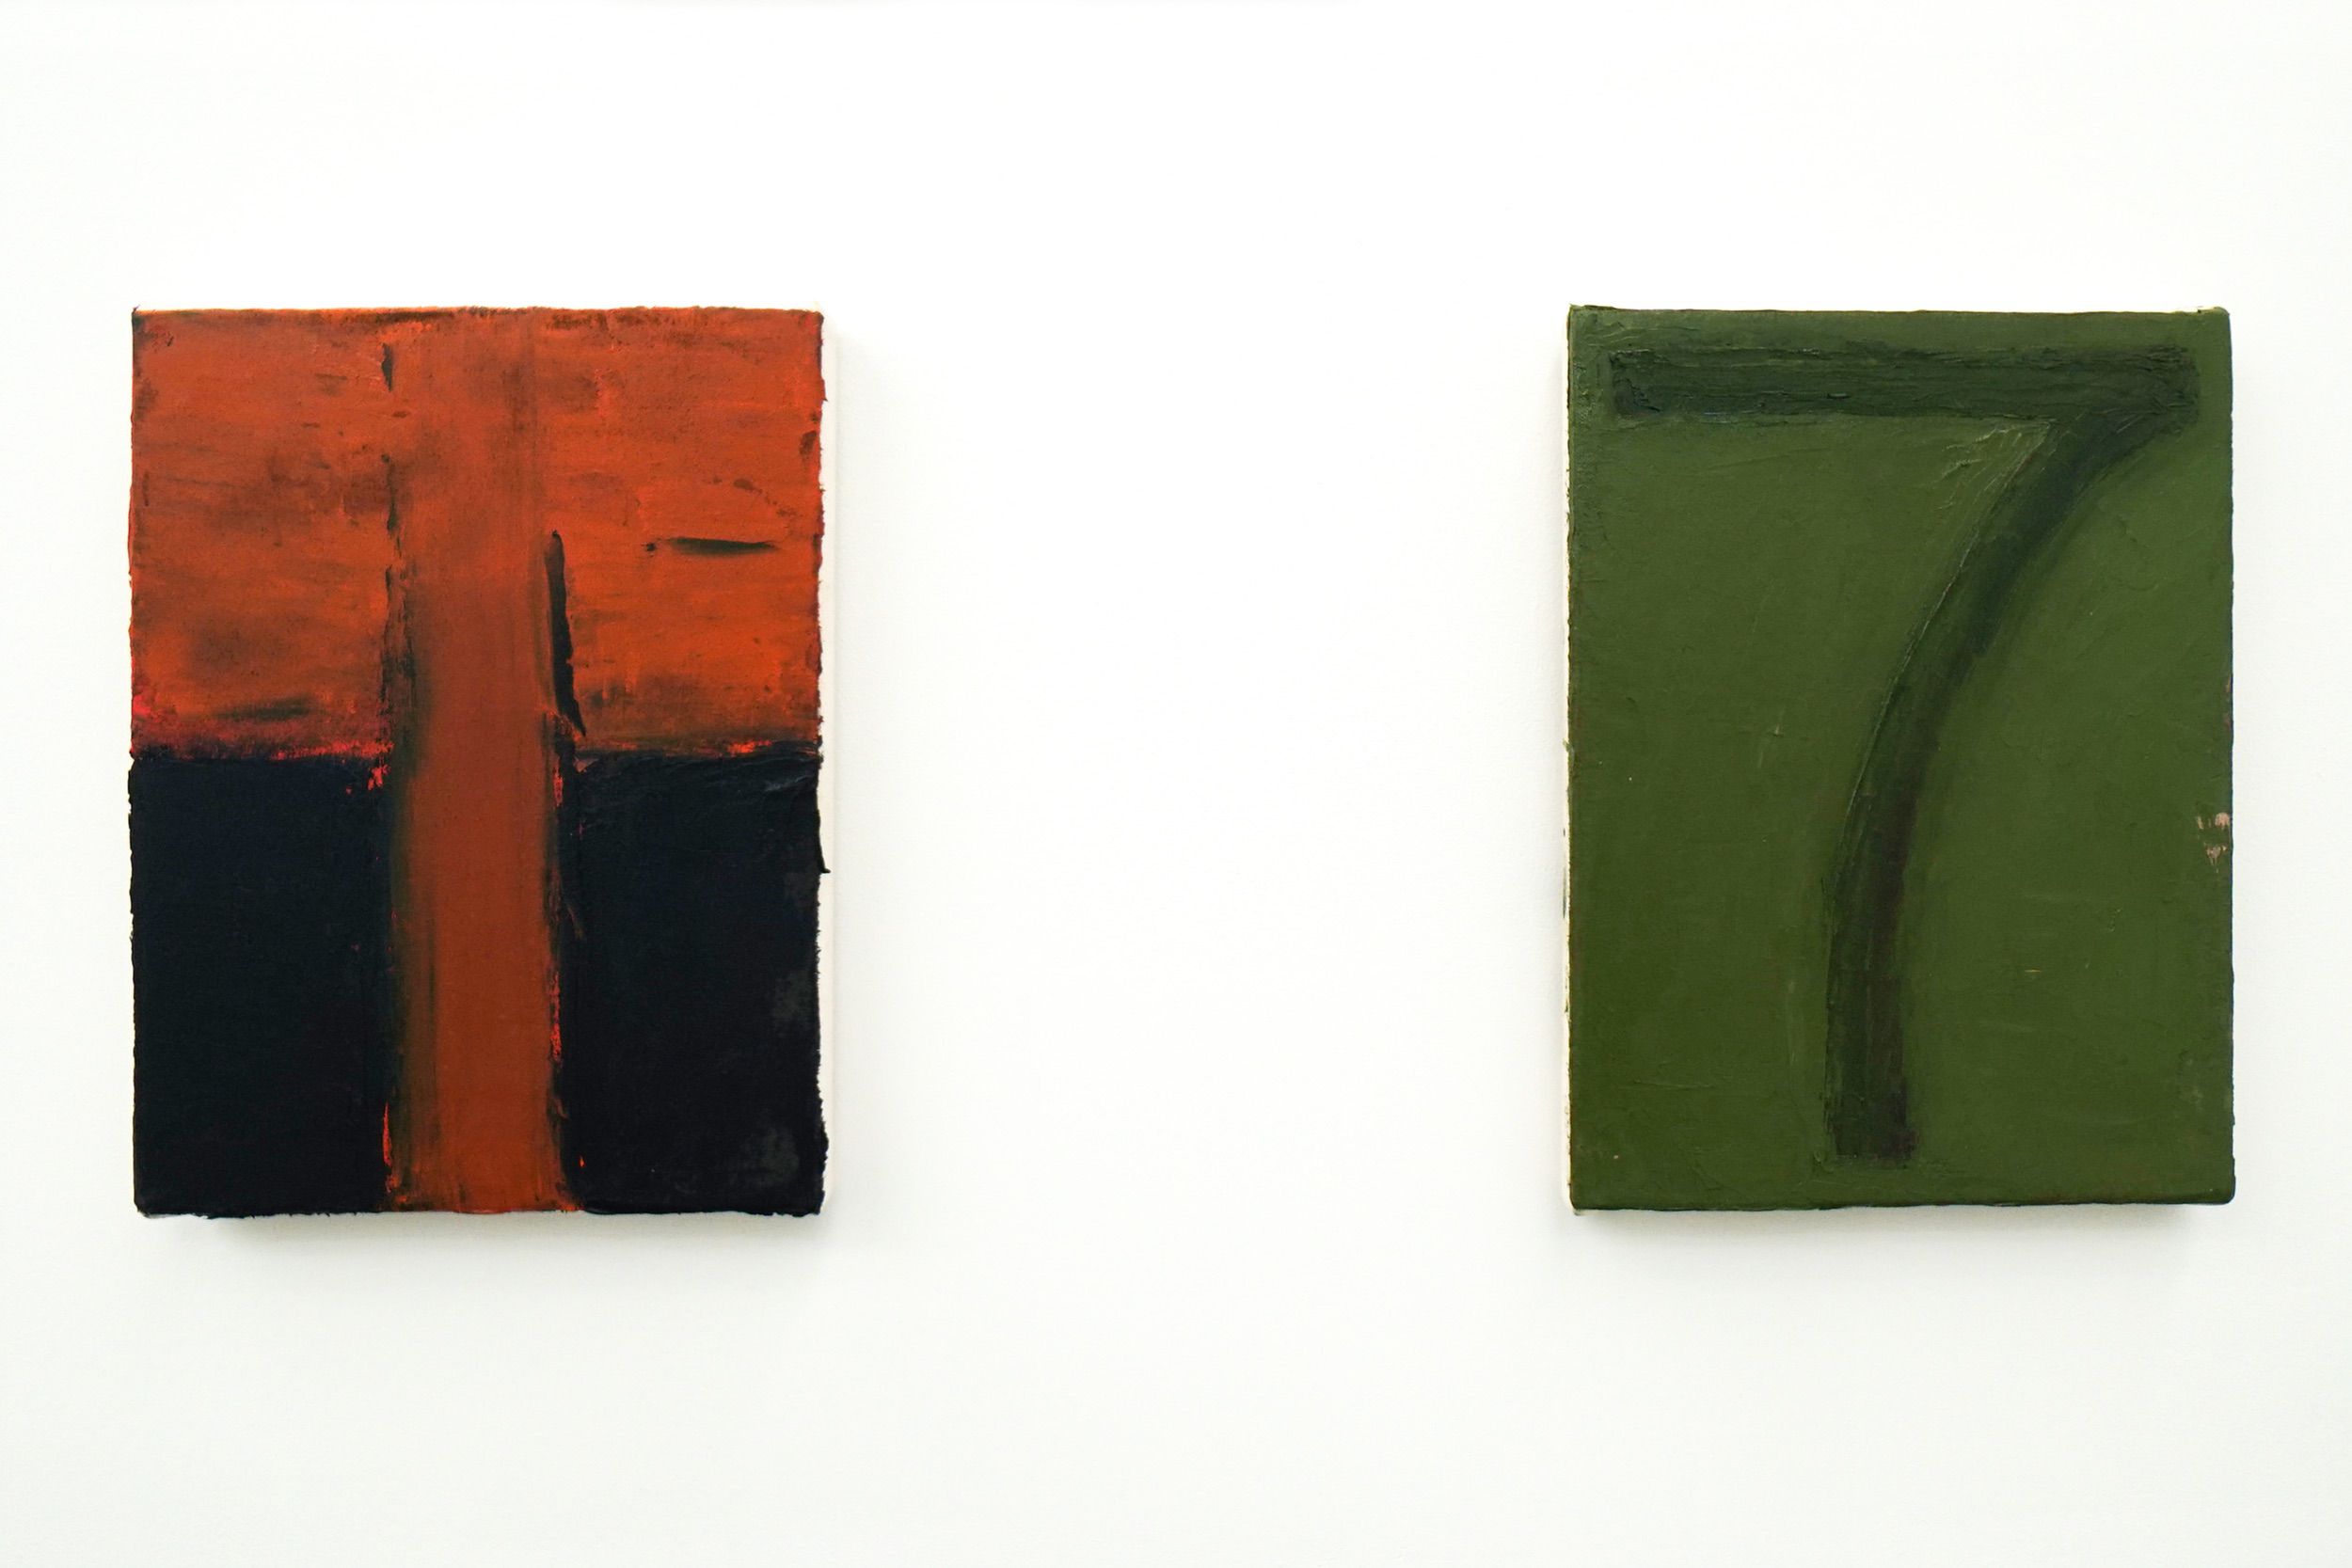  Left to right: Keith J. Varadi  Sonata Squeeze , 2013-2019 Oil and canvas 12 x 9 inches  Keith J. Varadi  Luck , 2012-2019 Oil and canvas 12 x 9 inches 